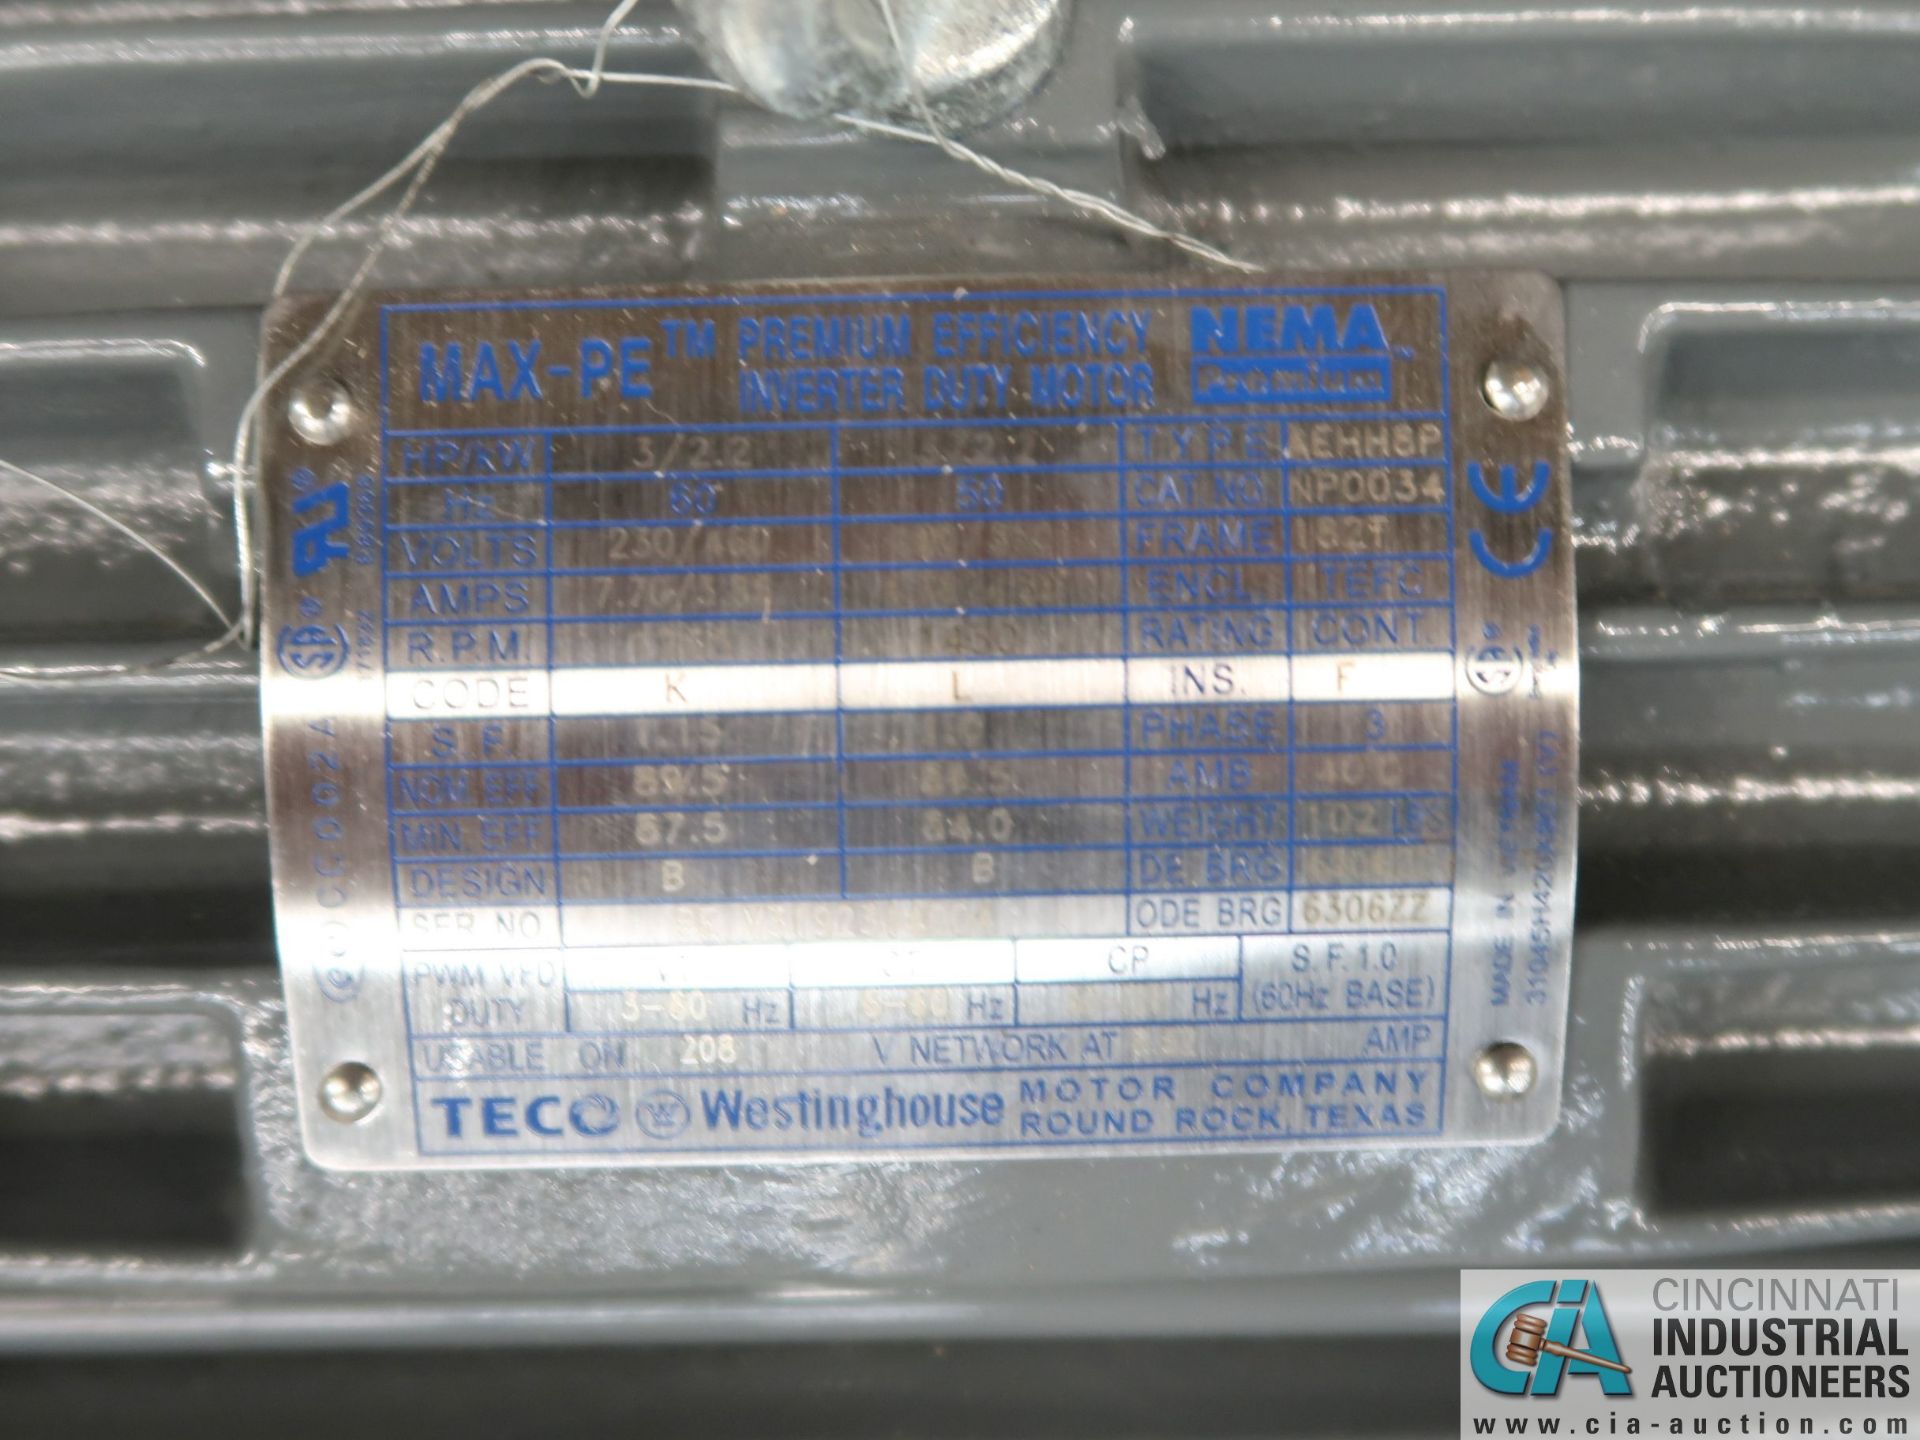 3 HP WESTINGHOUSE TYPE AEHH8P ELECTRIC MOTOR, 1,755 RPM (NEW) - Image 2 of 2